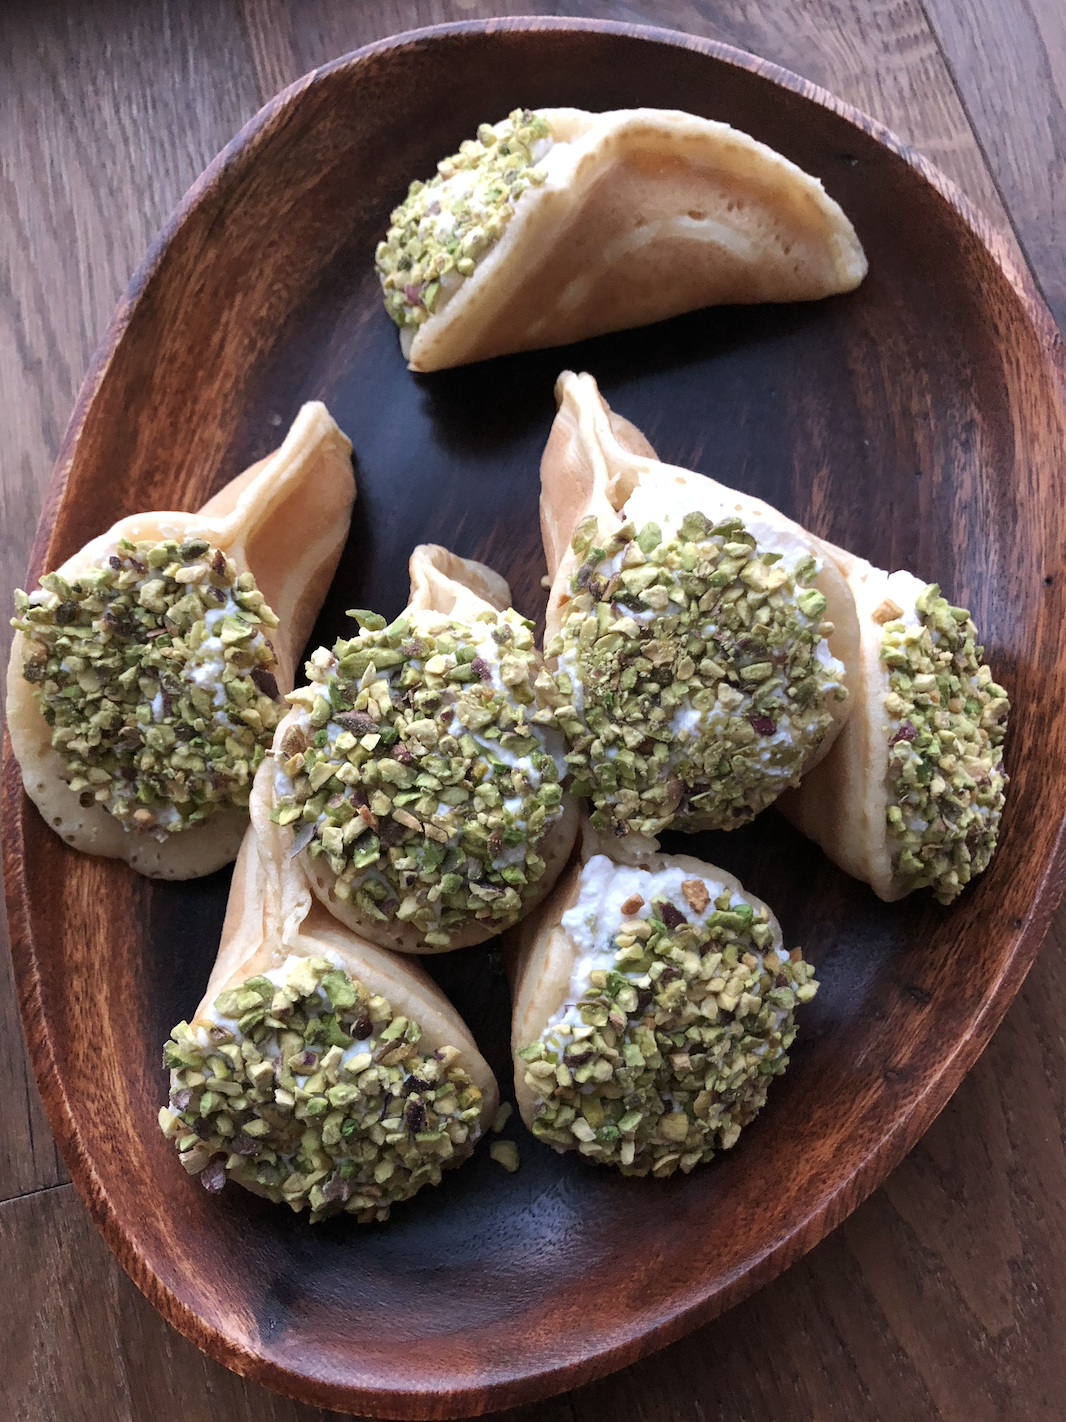 A wooden plate with a pile of atayef pancakes, rolled into a cone with a creamy filling and sprinkled with pistachio nuts.